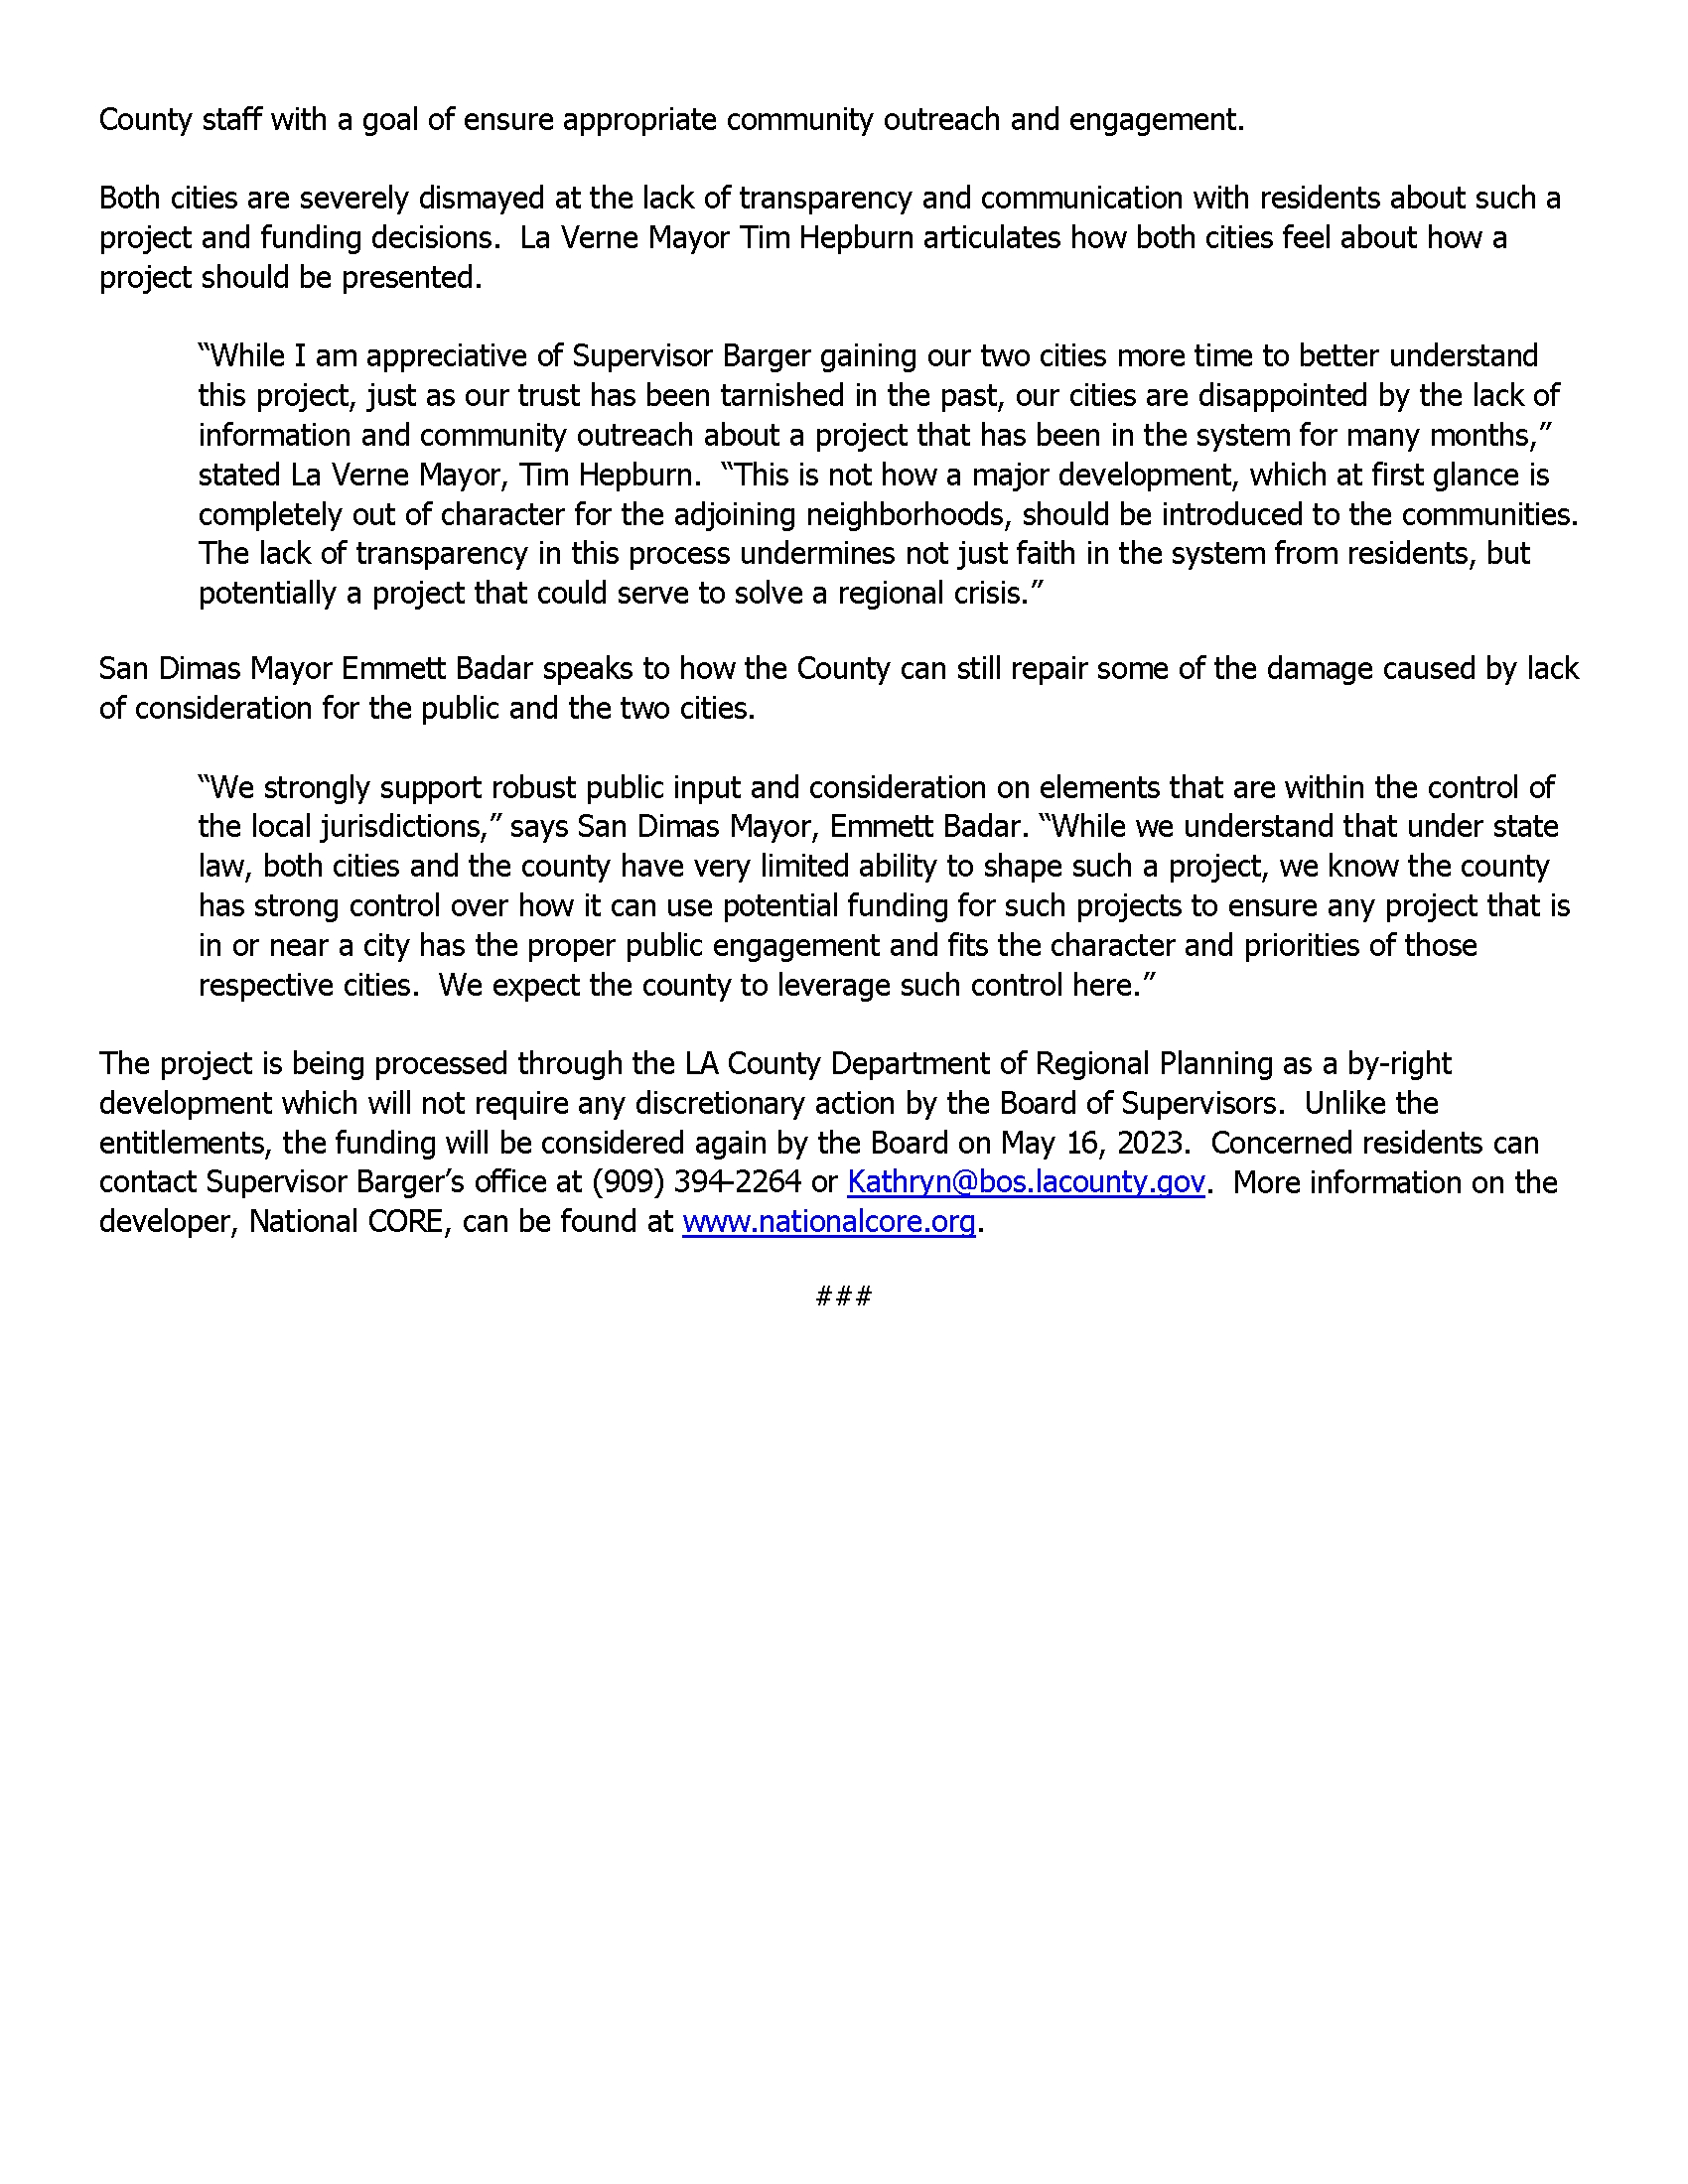 Press Release - SD and LV Joint Statement on 740 E Foothill Blvd_Page_2